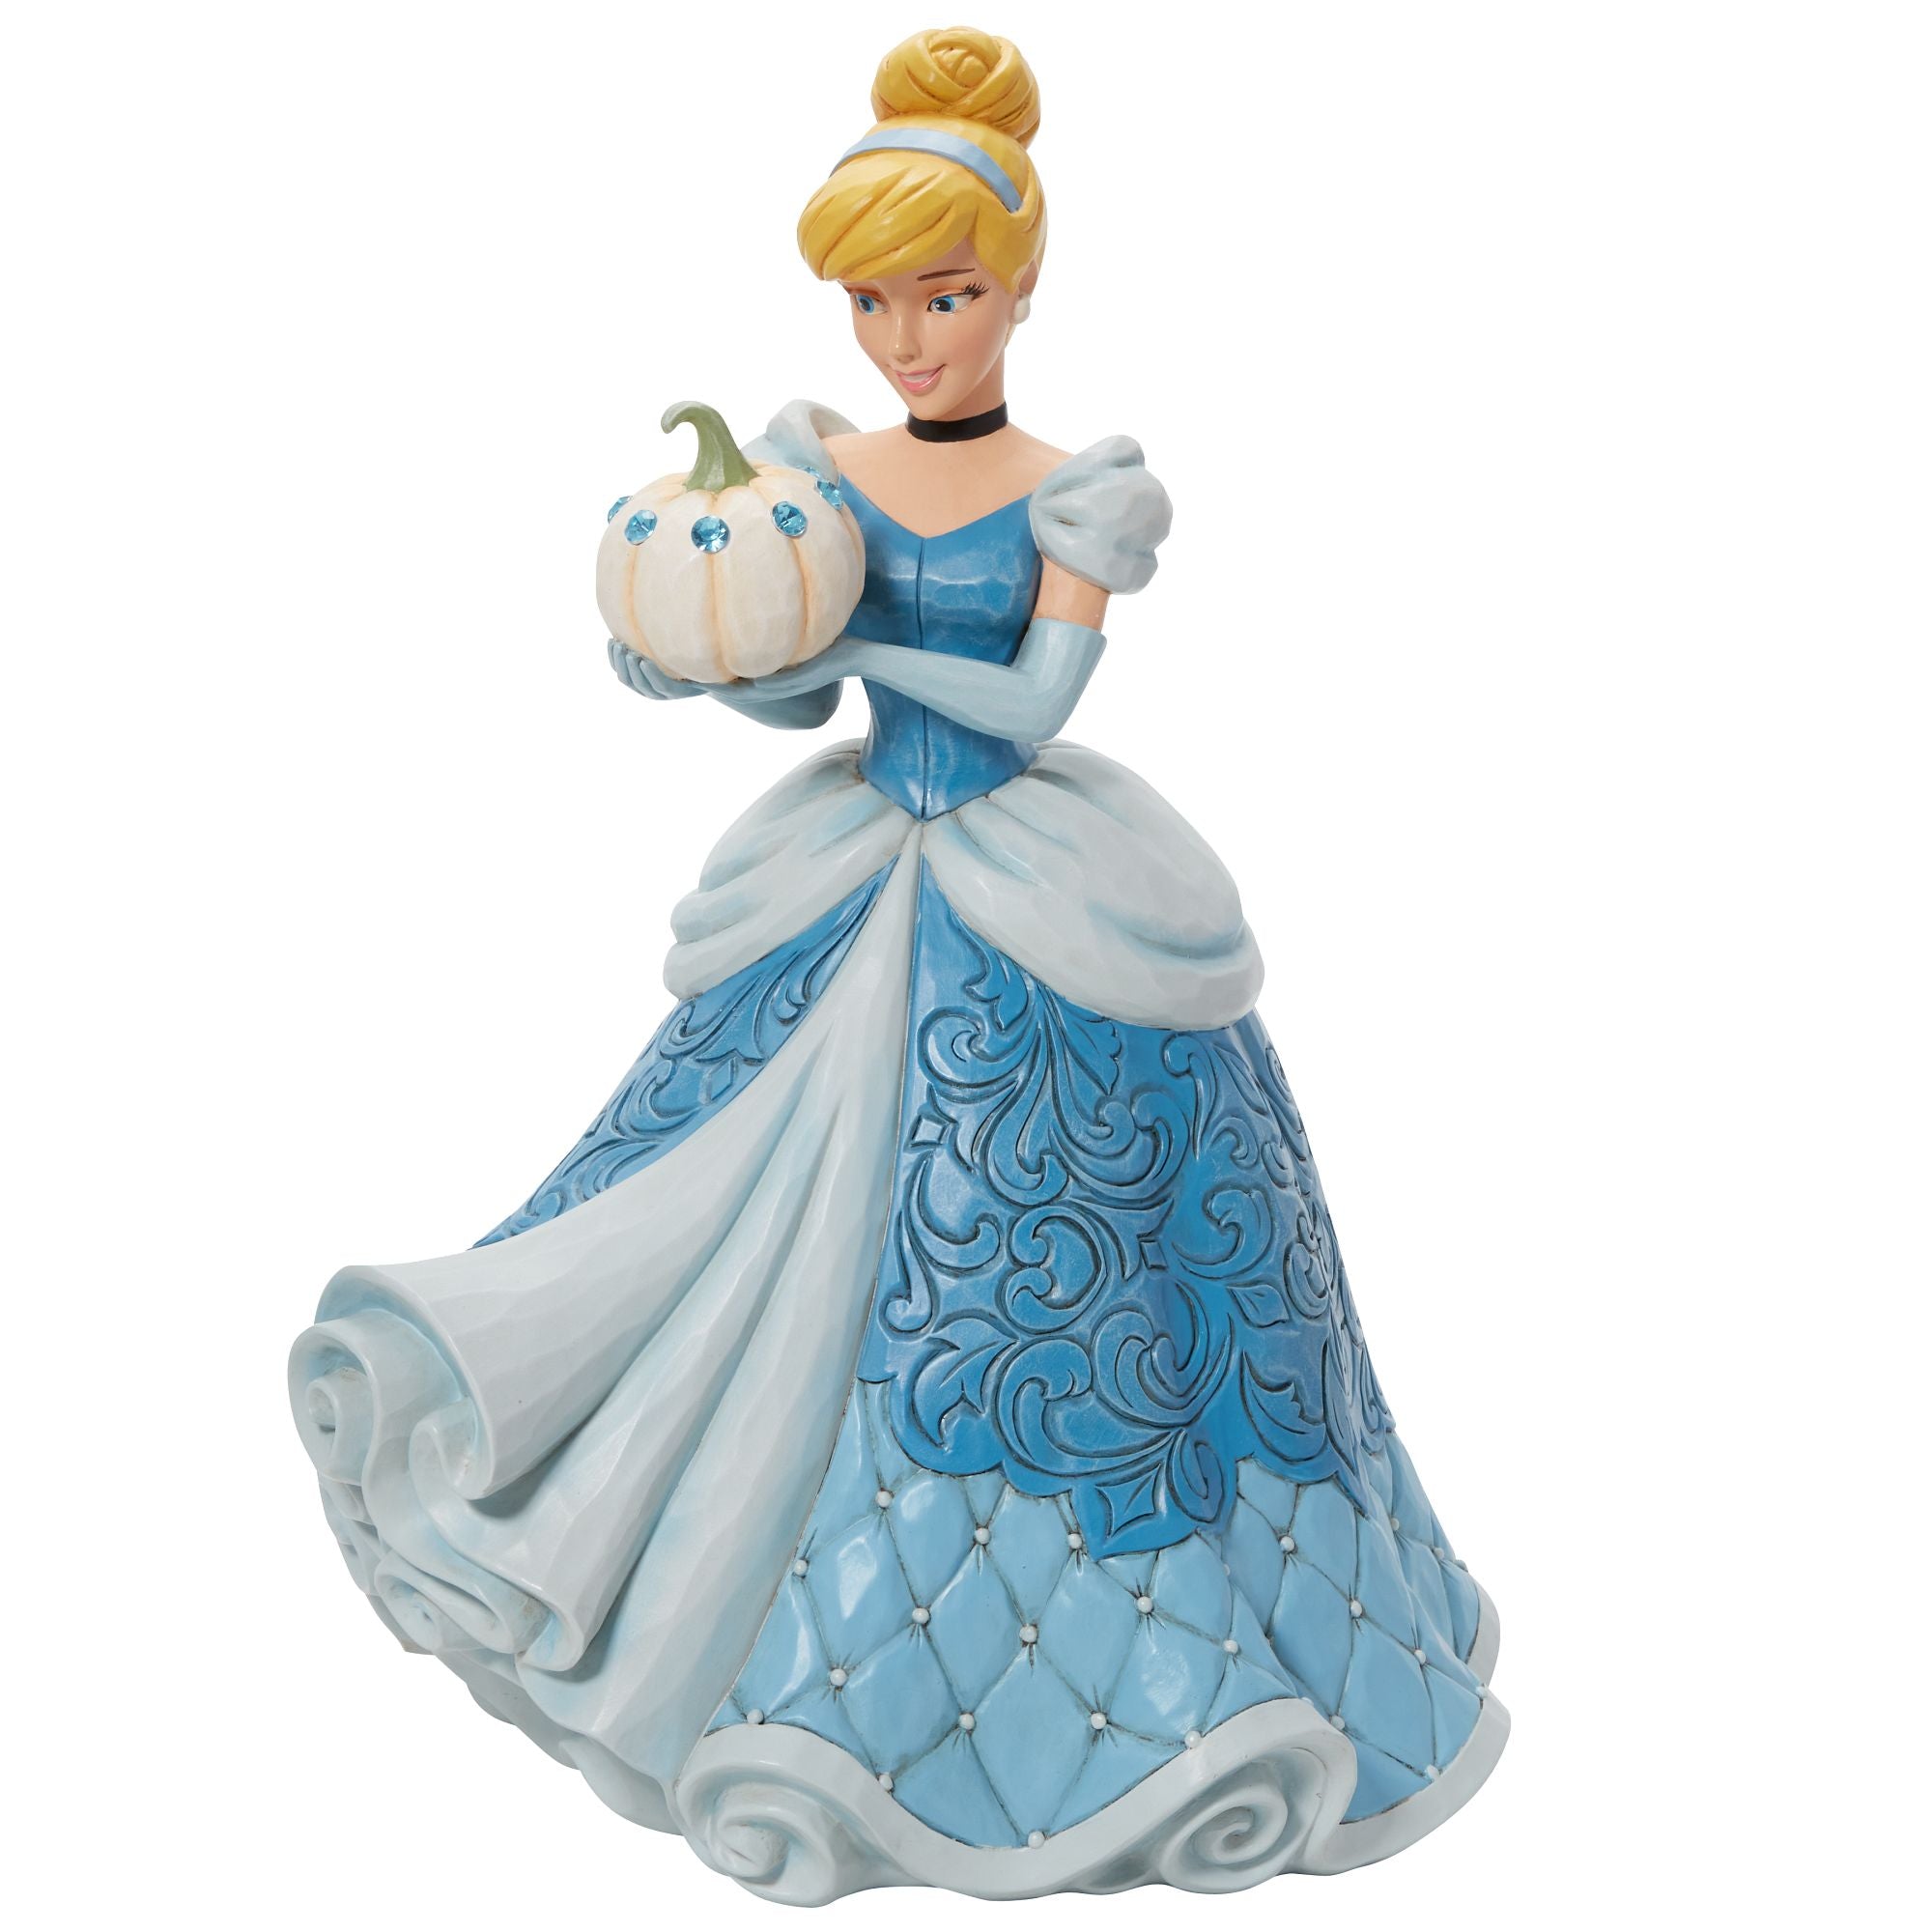 Disney Traditions Cinderella Figurines by Jim Shore NEW in Gift Box